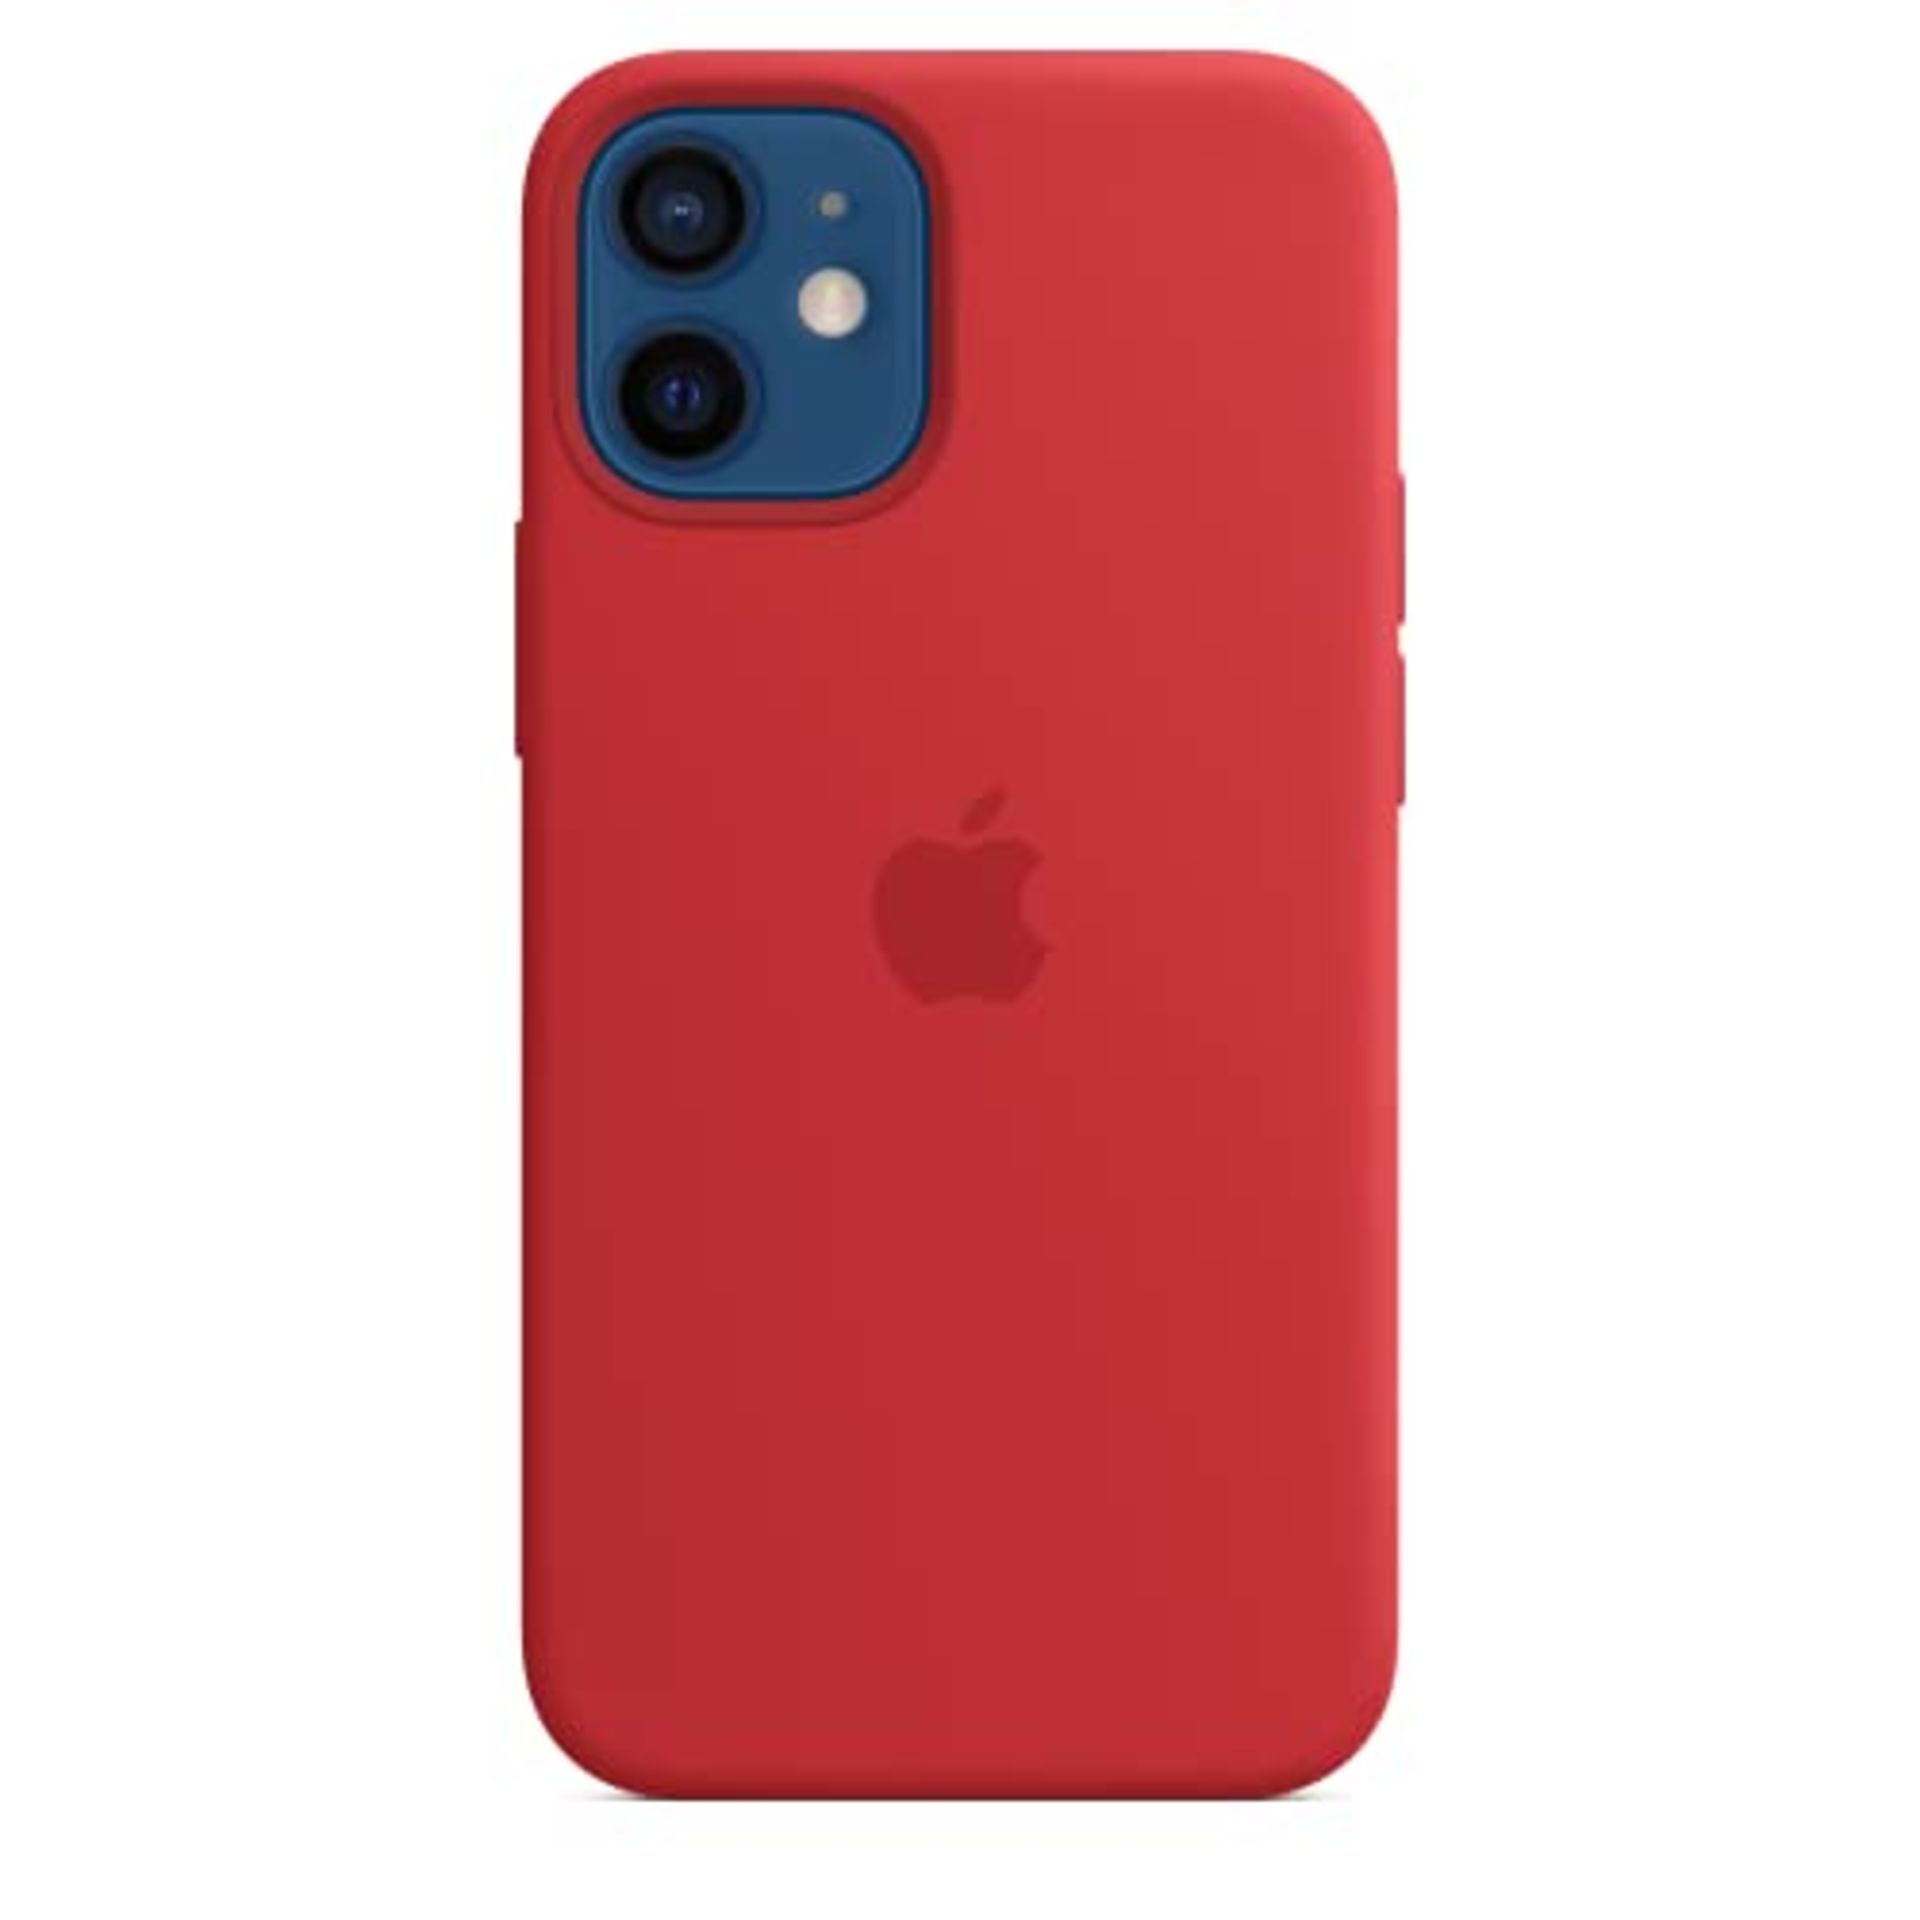 Apple Silicone Case with MagSafe (for iPhone 12 mini) - (PRODUCT) RED